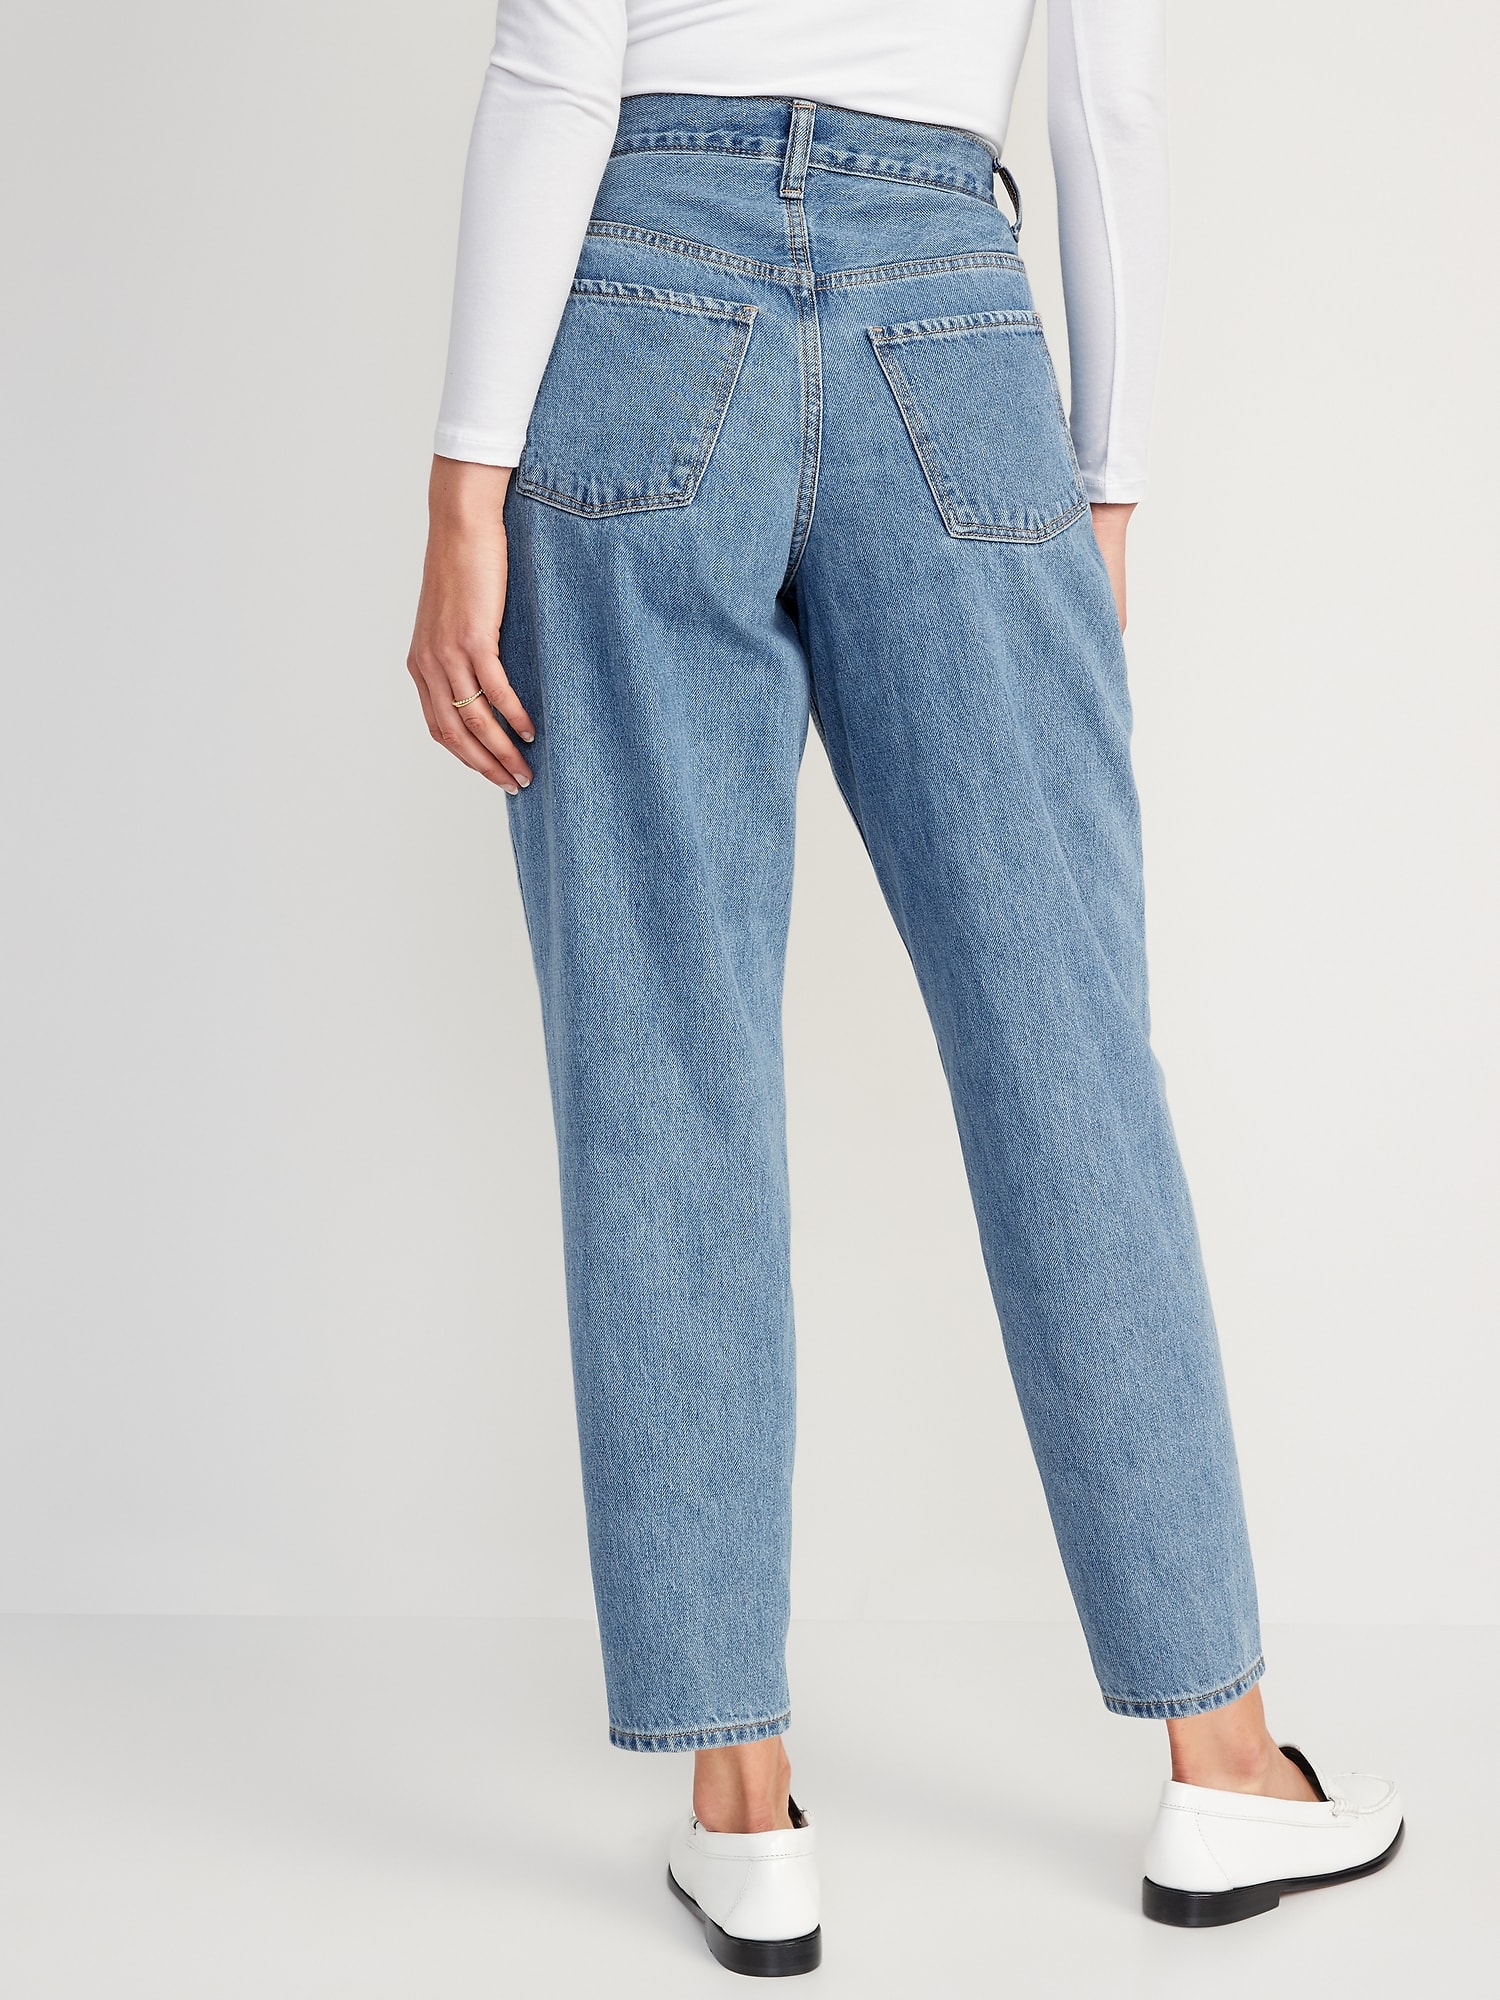 Extra High-Waisted Ripped Non-Stretch Balloon Jeans | Old Navy